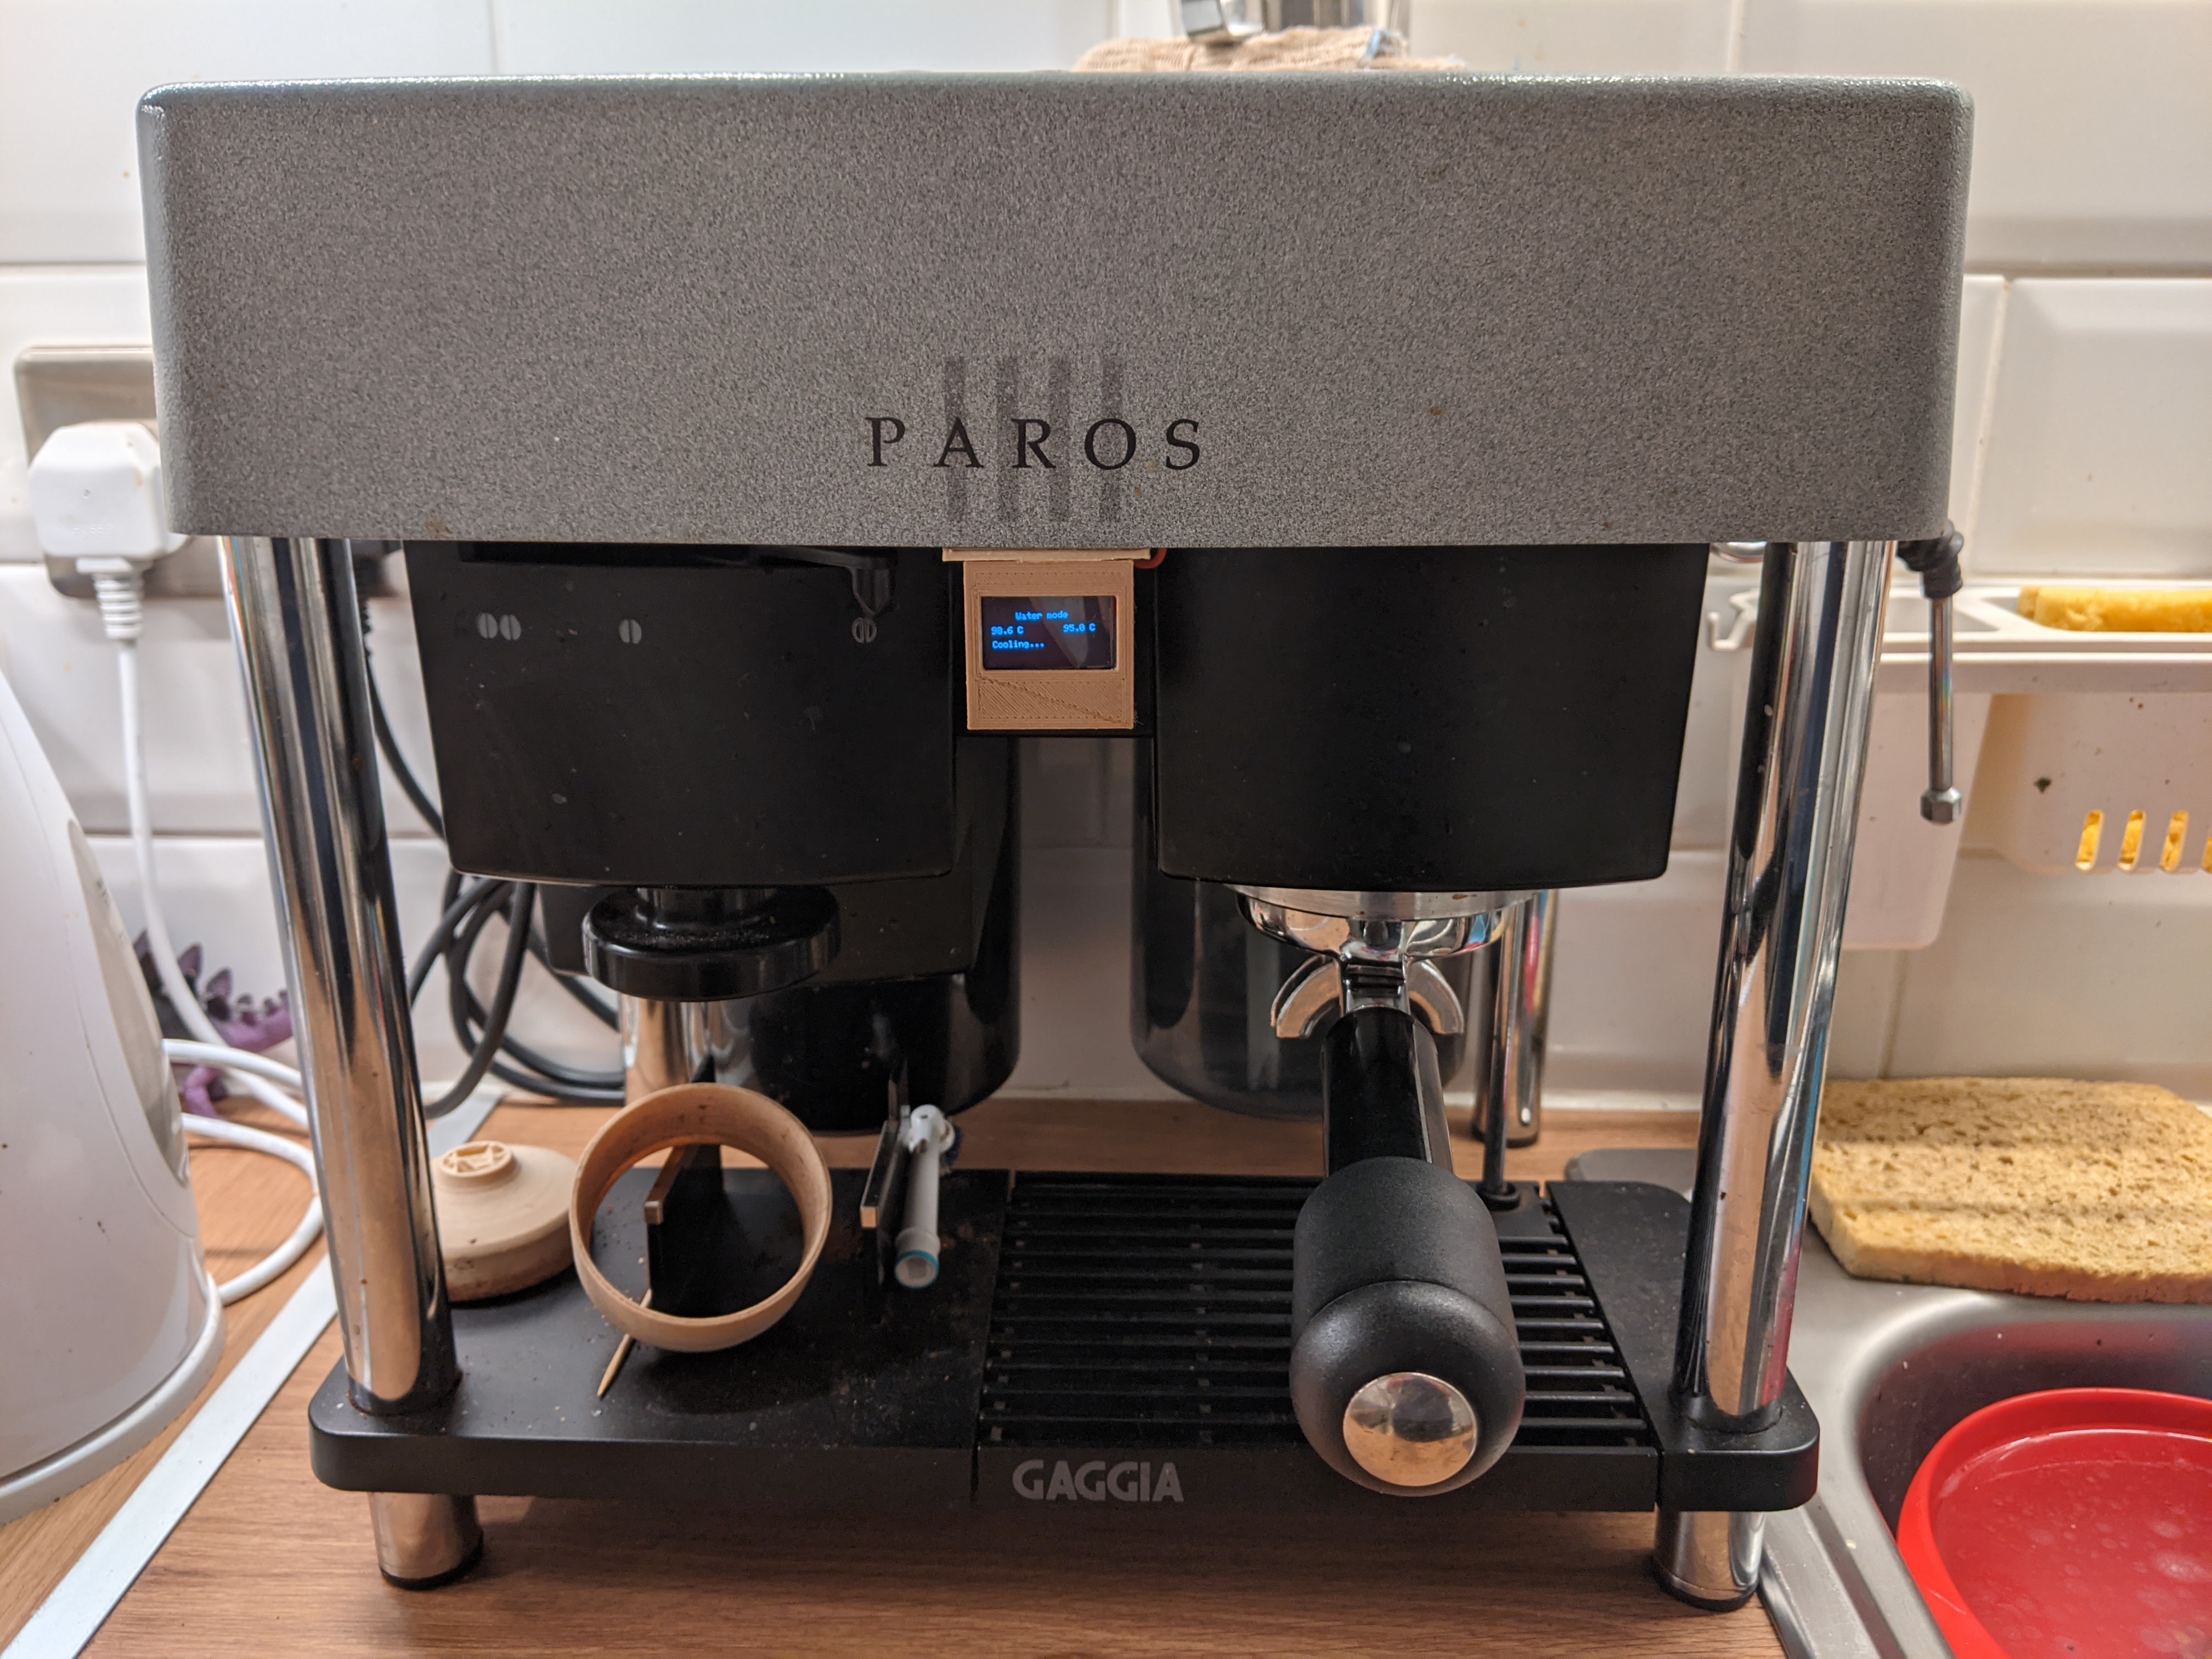 Final external assembly of the Gaggia Paros